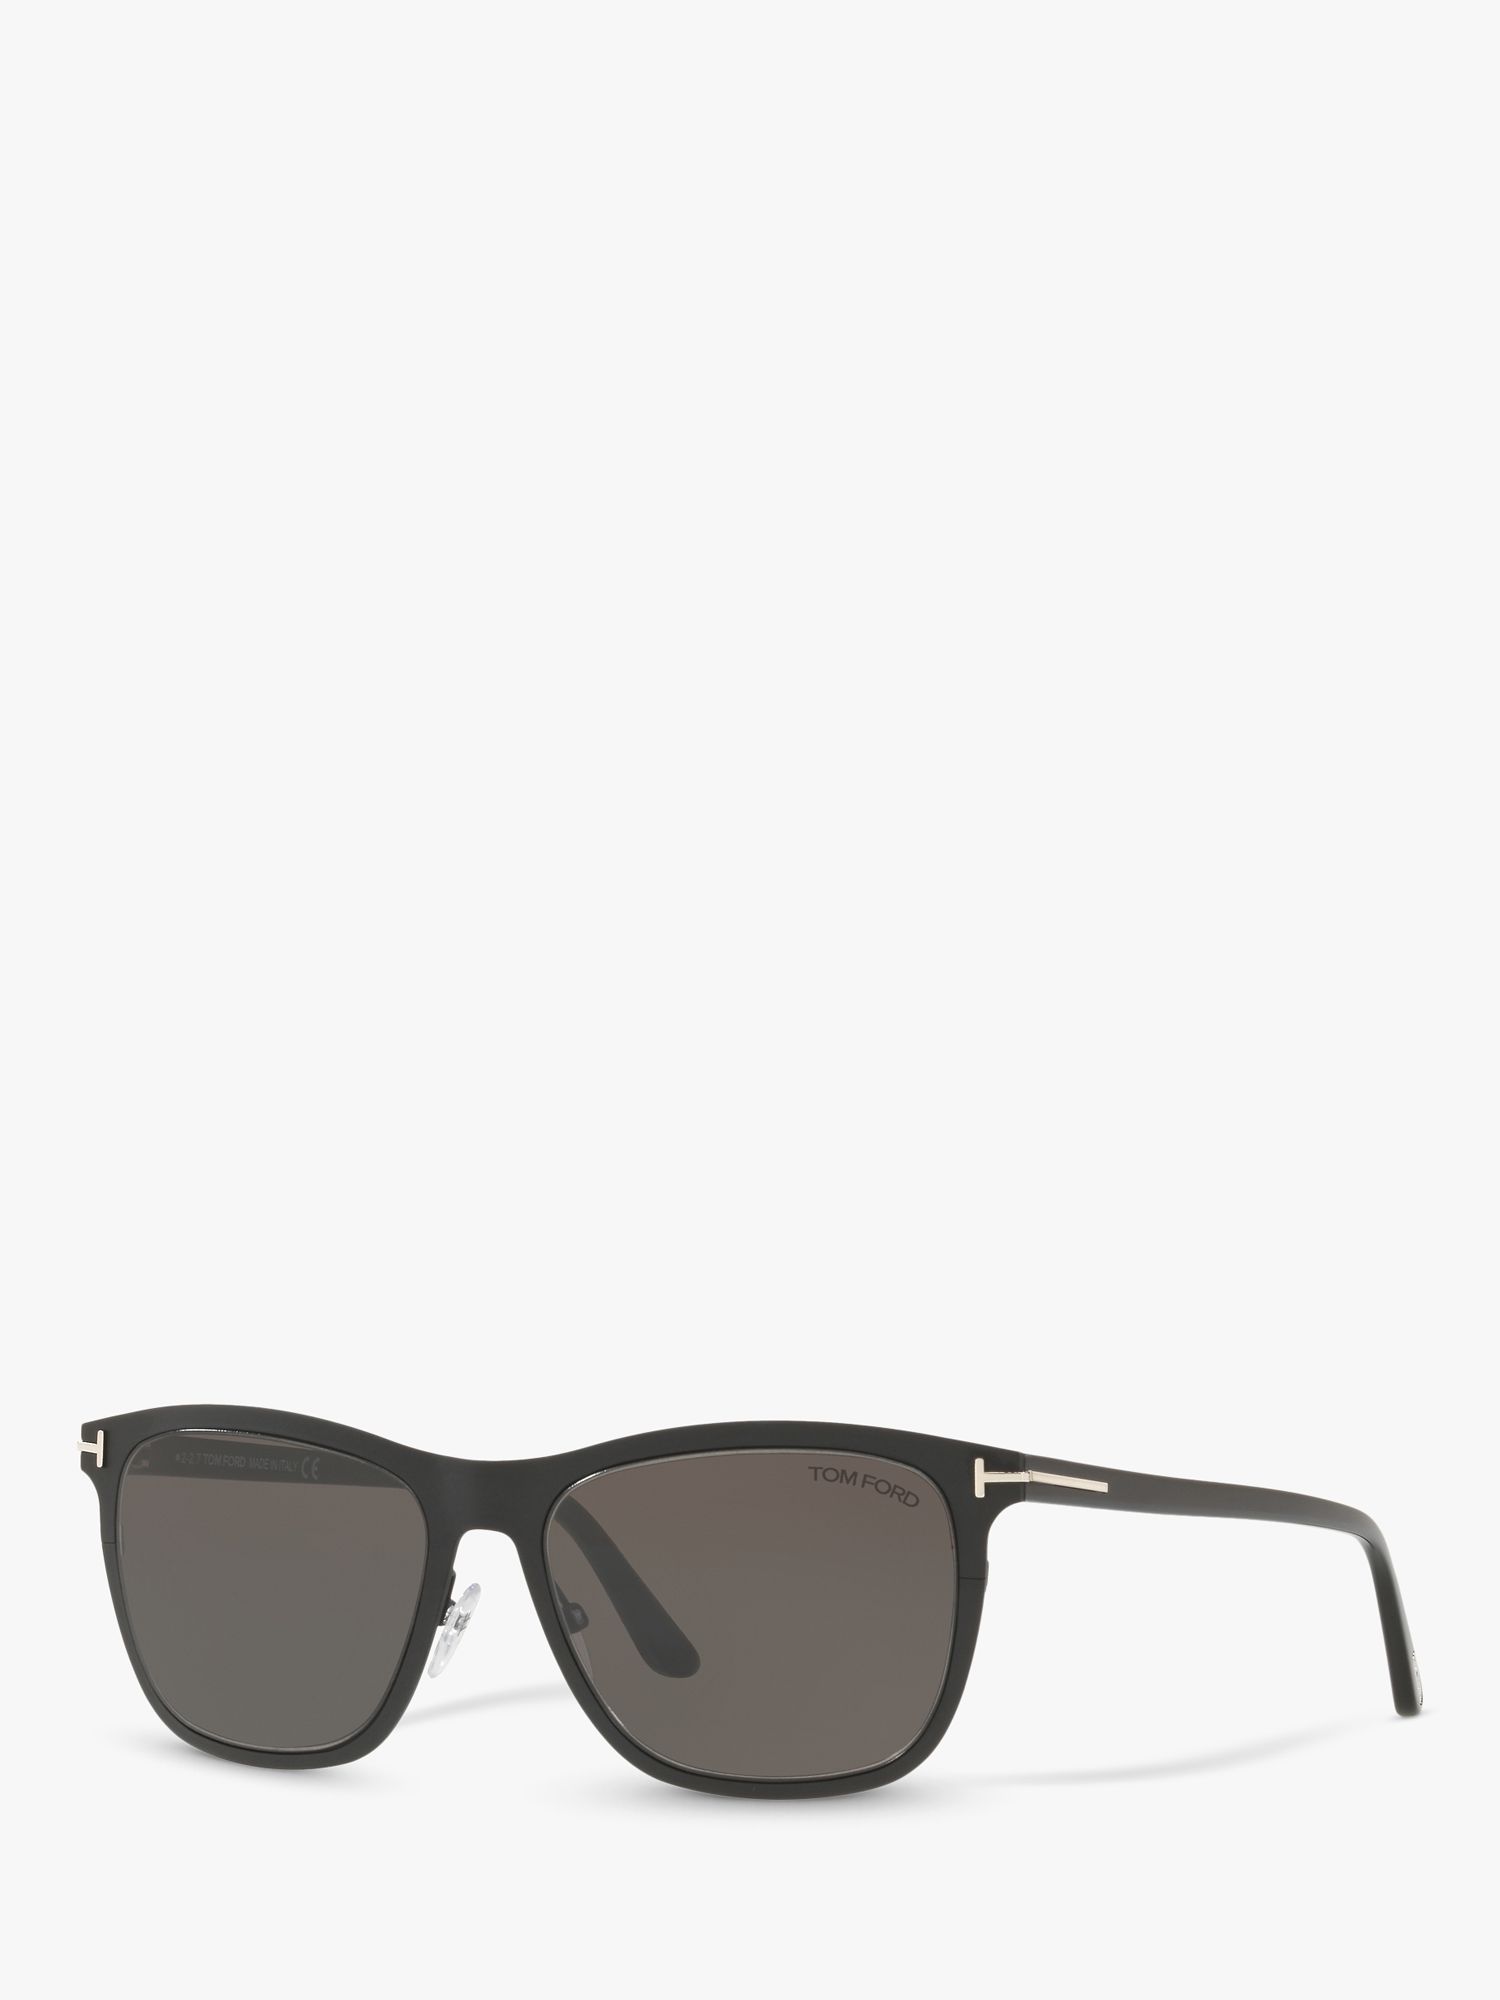 TOM FORD FT0526 Alasdhair Square Sunglasses, Black/Grey at John Lewis &  Partners